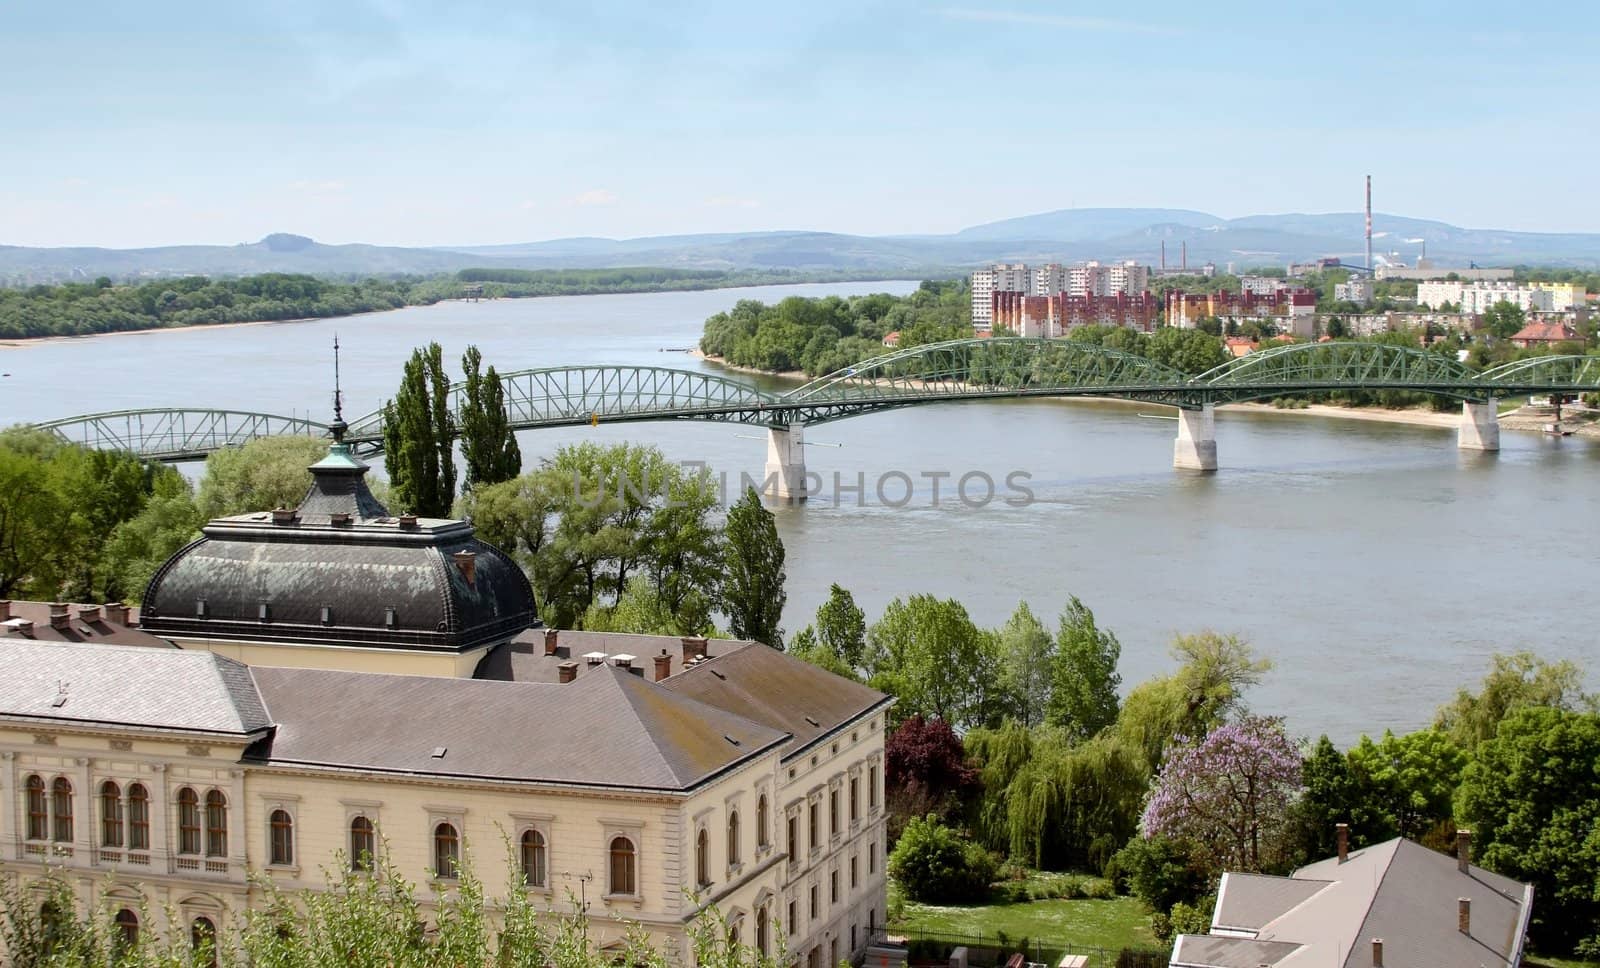 view of danube, from visegrad fortress, hungary